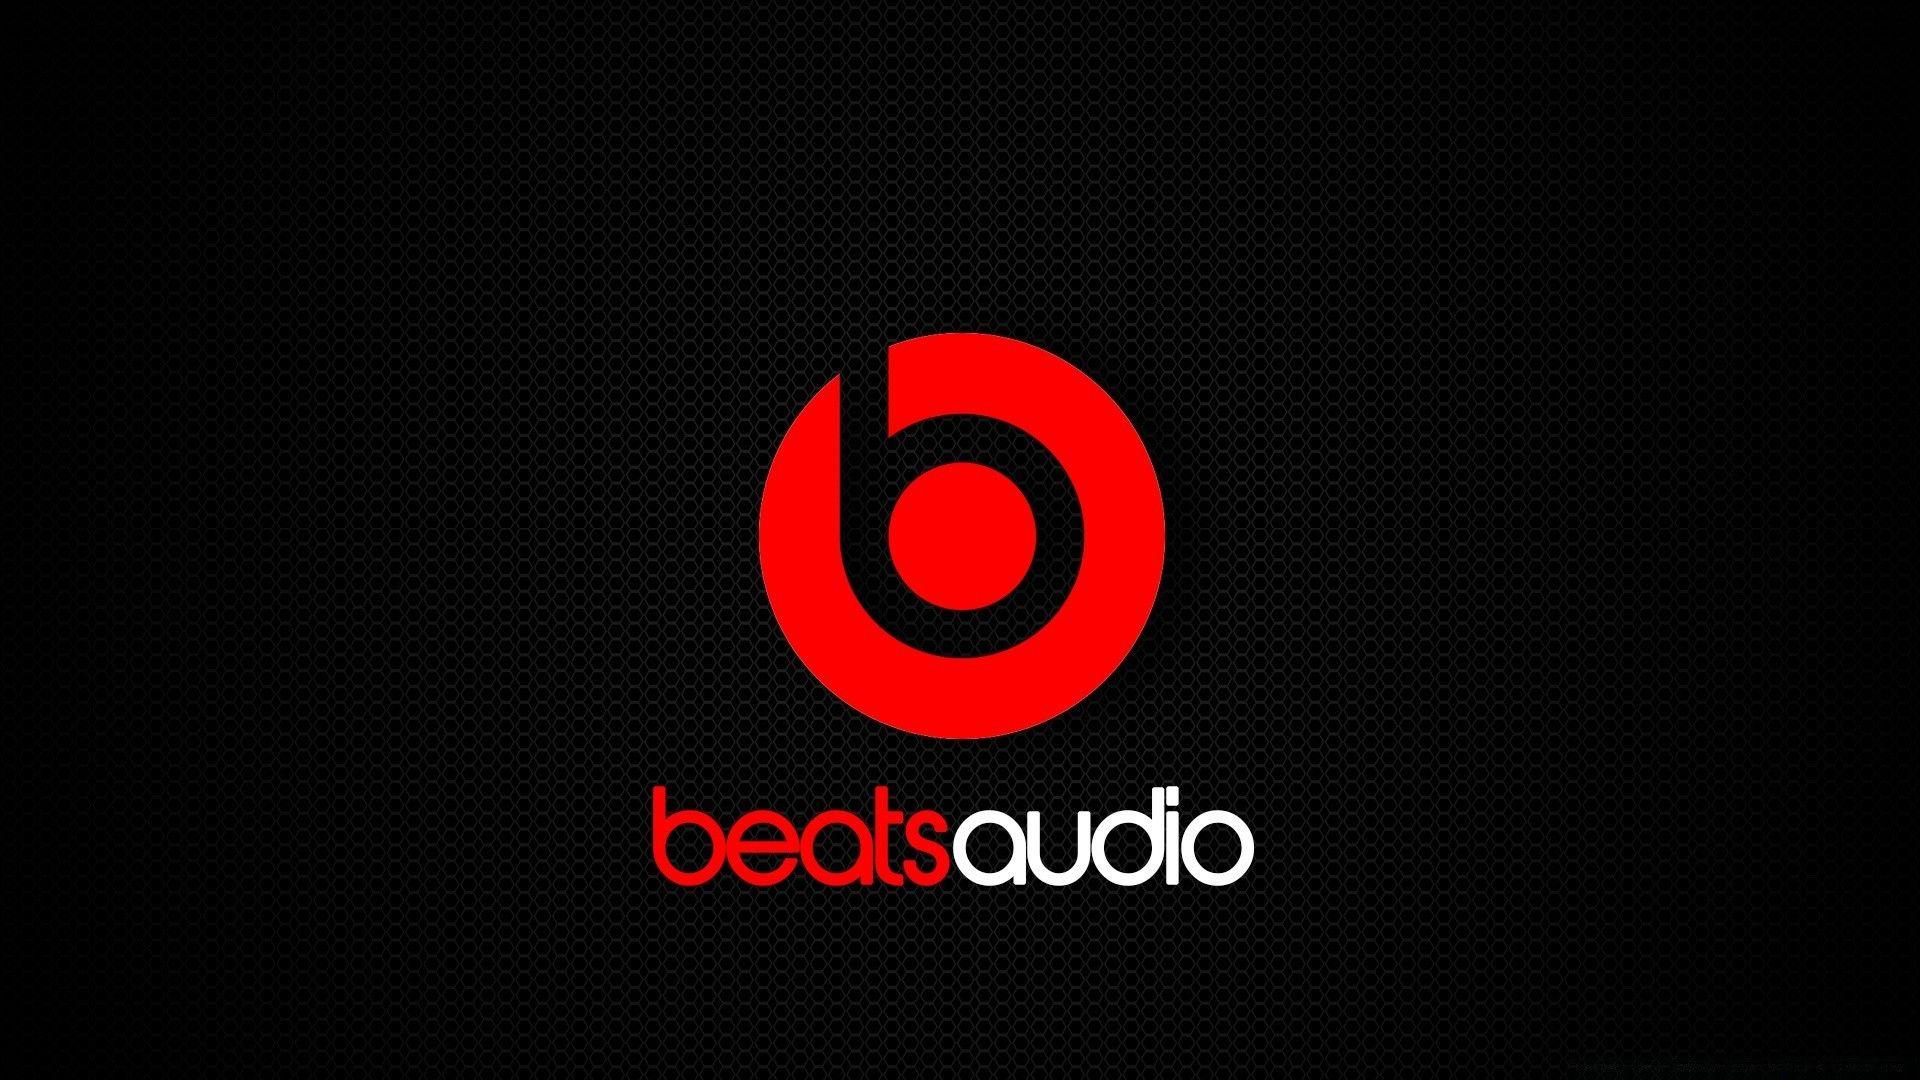 Beats Audio. Android wallpaper for free